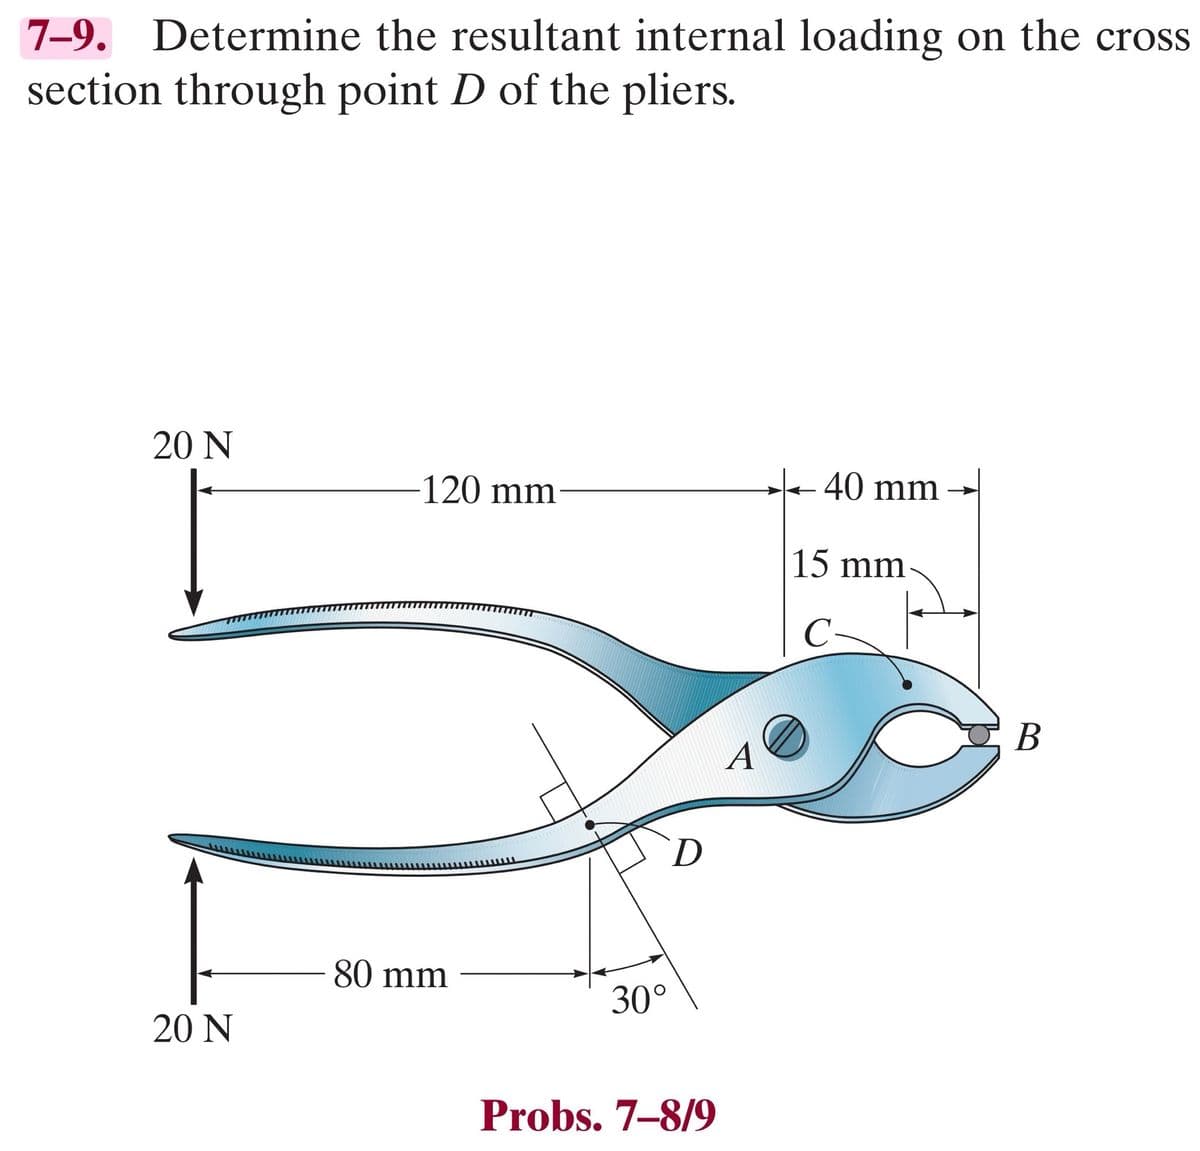 7-9. Determine the resultant internal loading on the cross
section through point D of the pliers.
20 N
20 N
120 mm
80 mm
**************
poseen
30°
D
Probs. 7-8/9
A
40 mm
15 mm
B